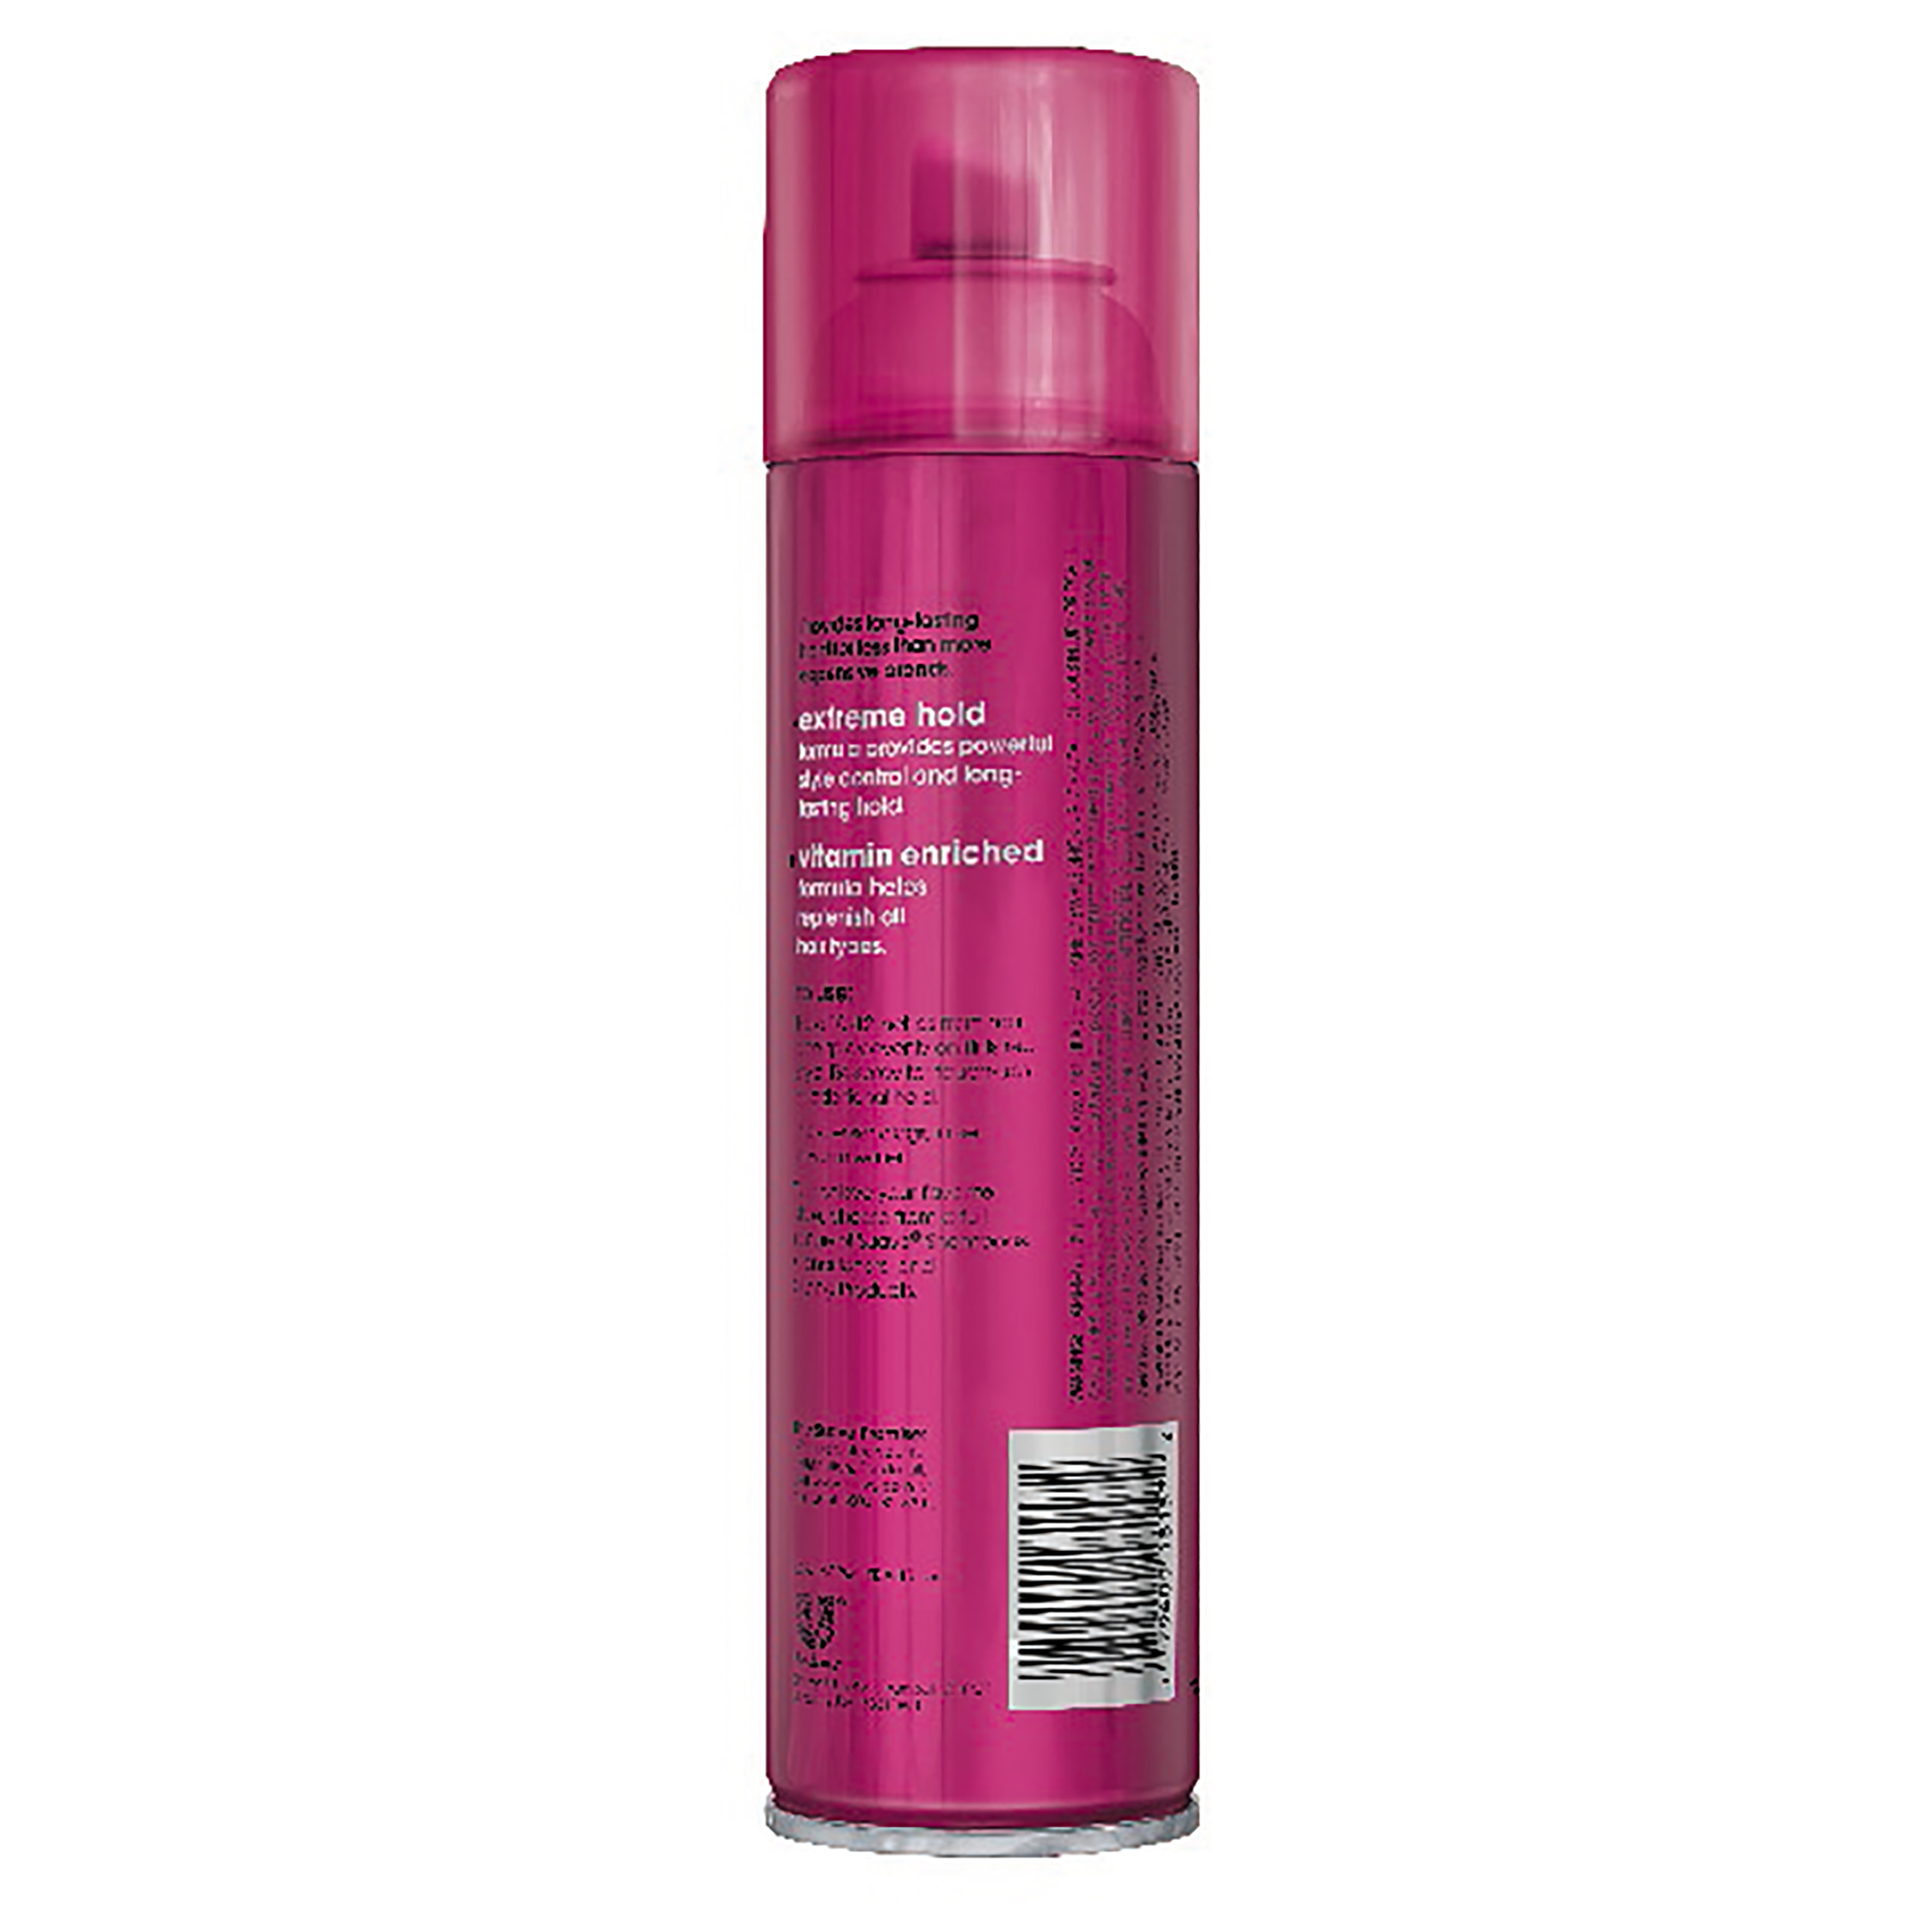 Suave Hairspray Extreme Hold Hair Styling Product 11 oz - image 3 of 8